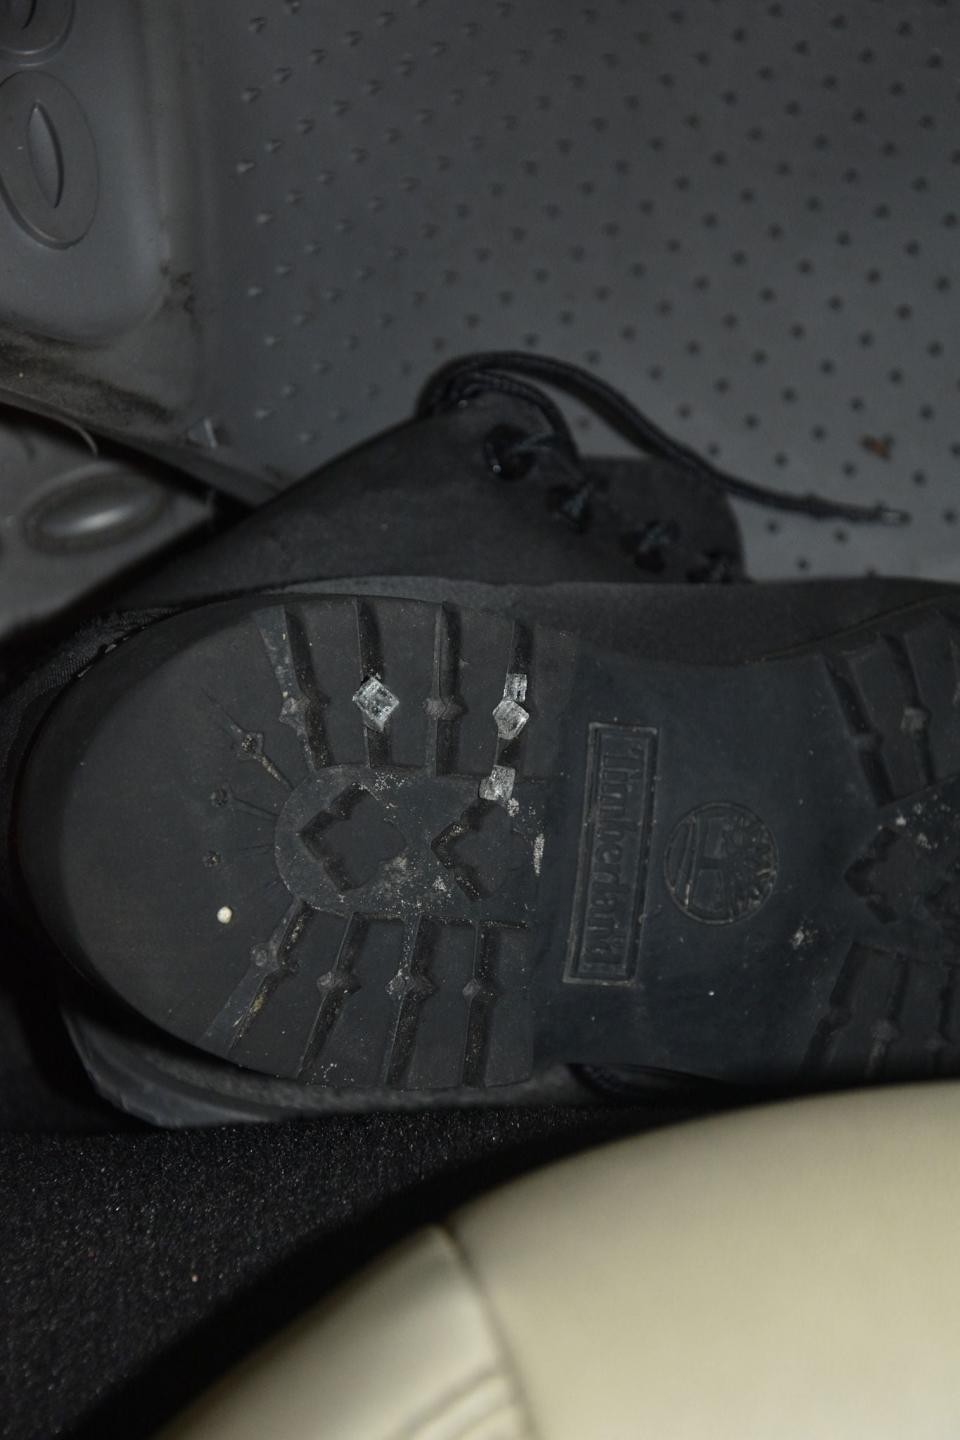 Black boots were found in the back seat of the suspect's car with shards of broken glass stuck in the soles.